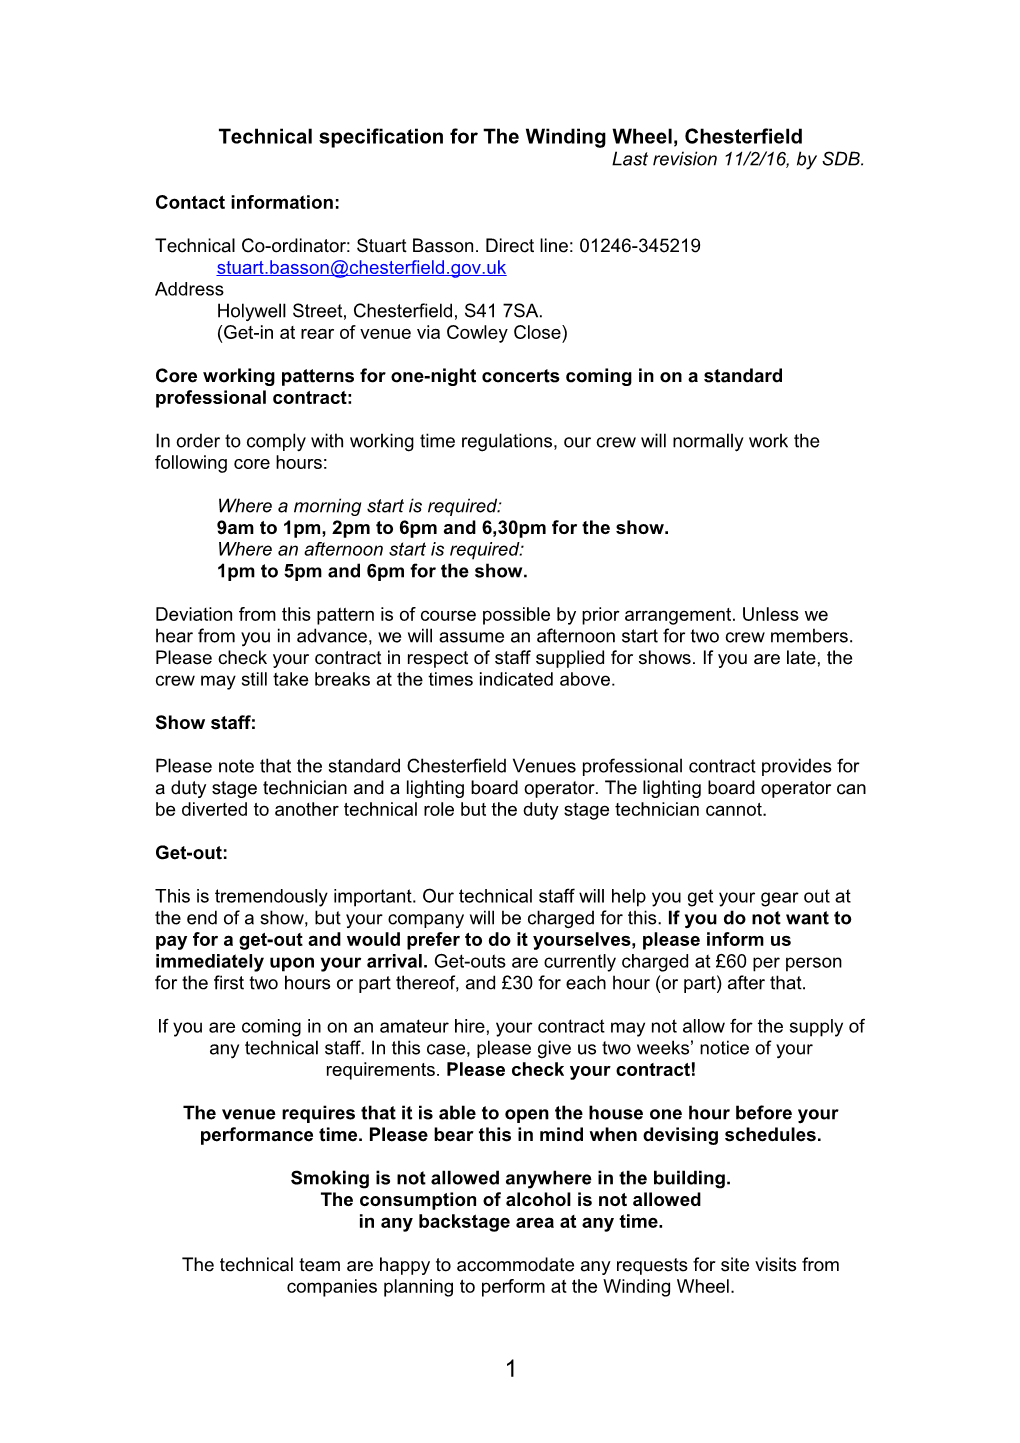 Technical Specification for the Winding Wheel, Chesterfield